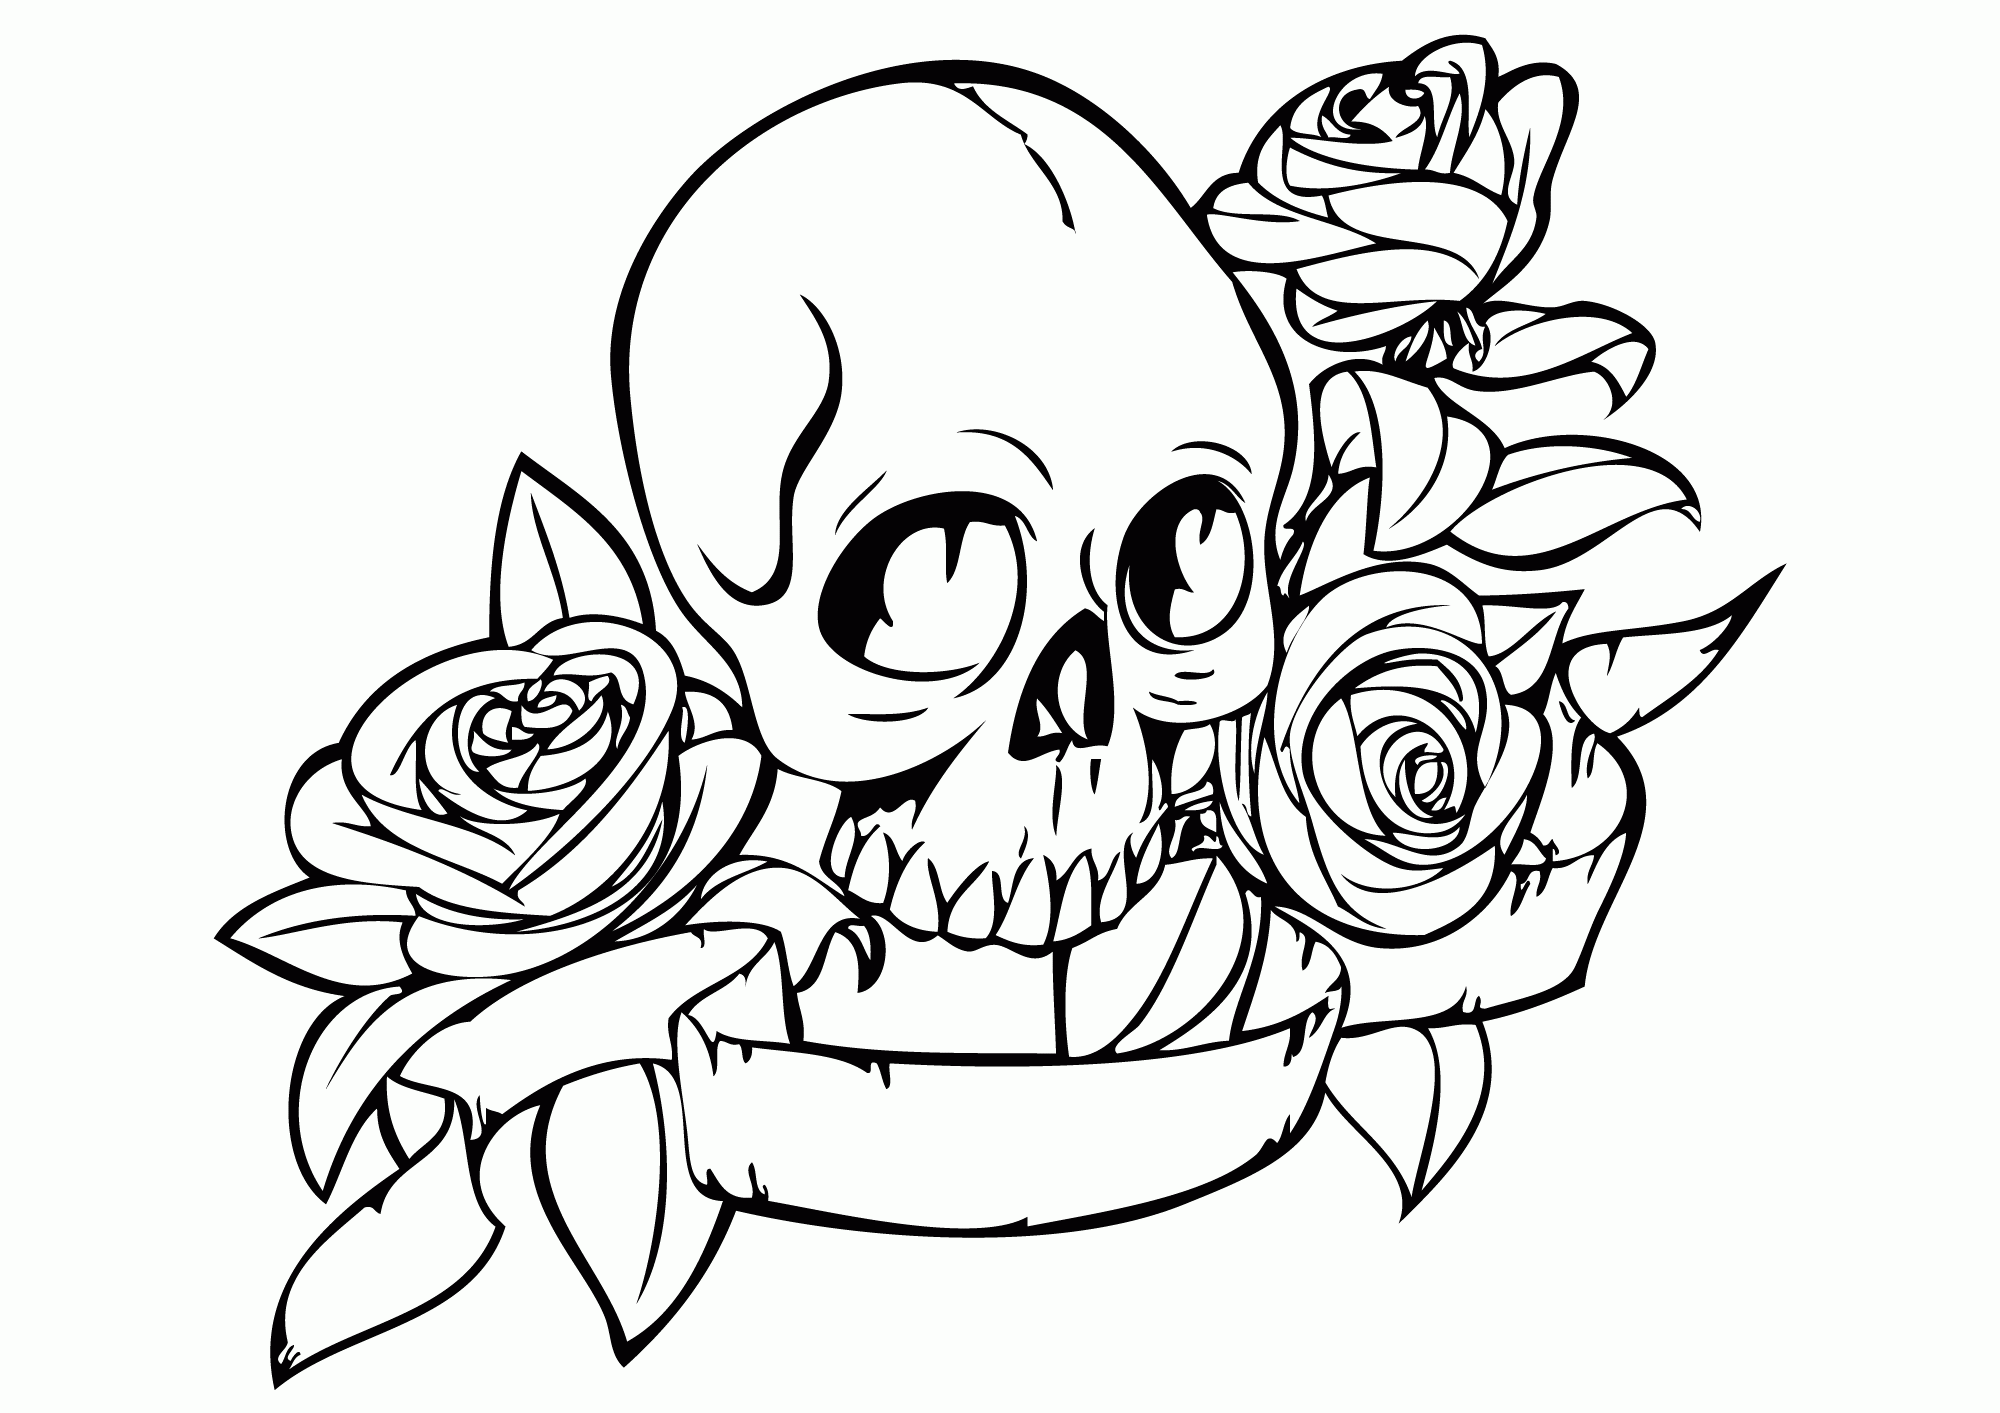 Skull Coloring Sheet - Coloring Pages for Kids and for Adults